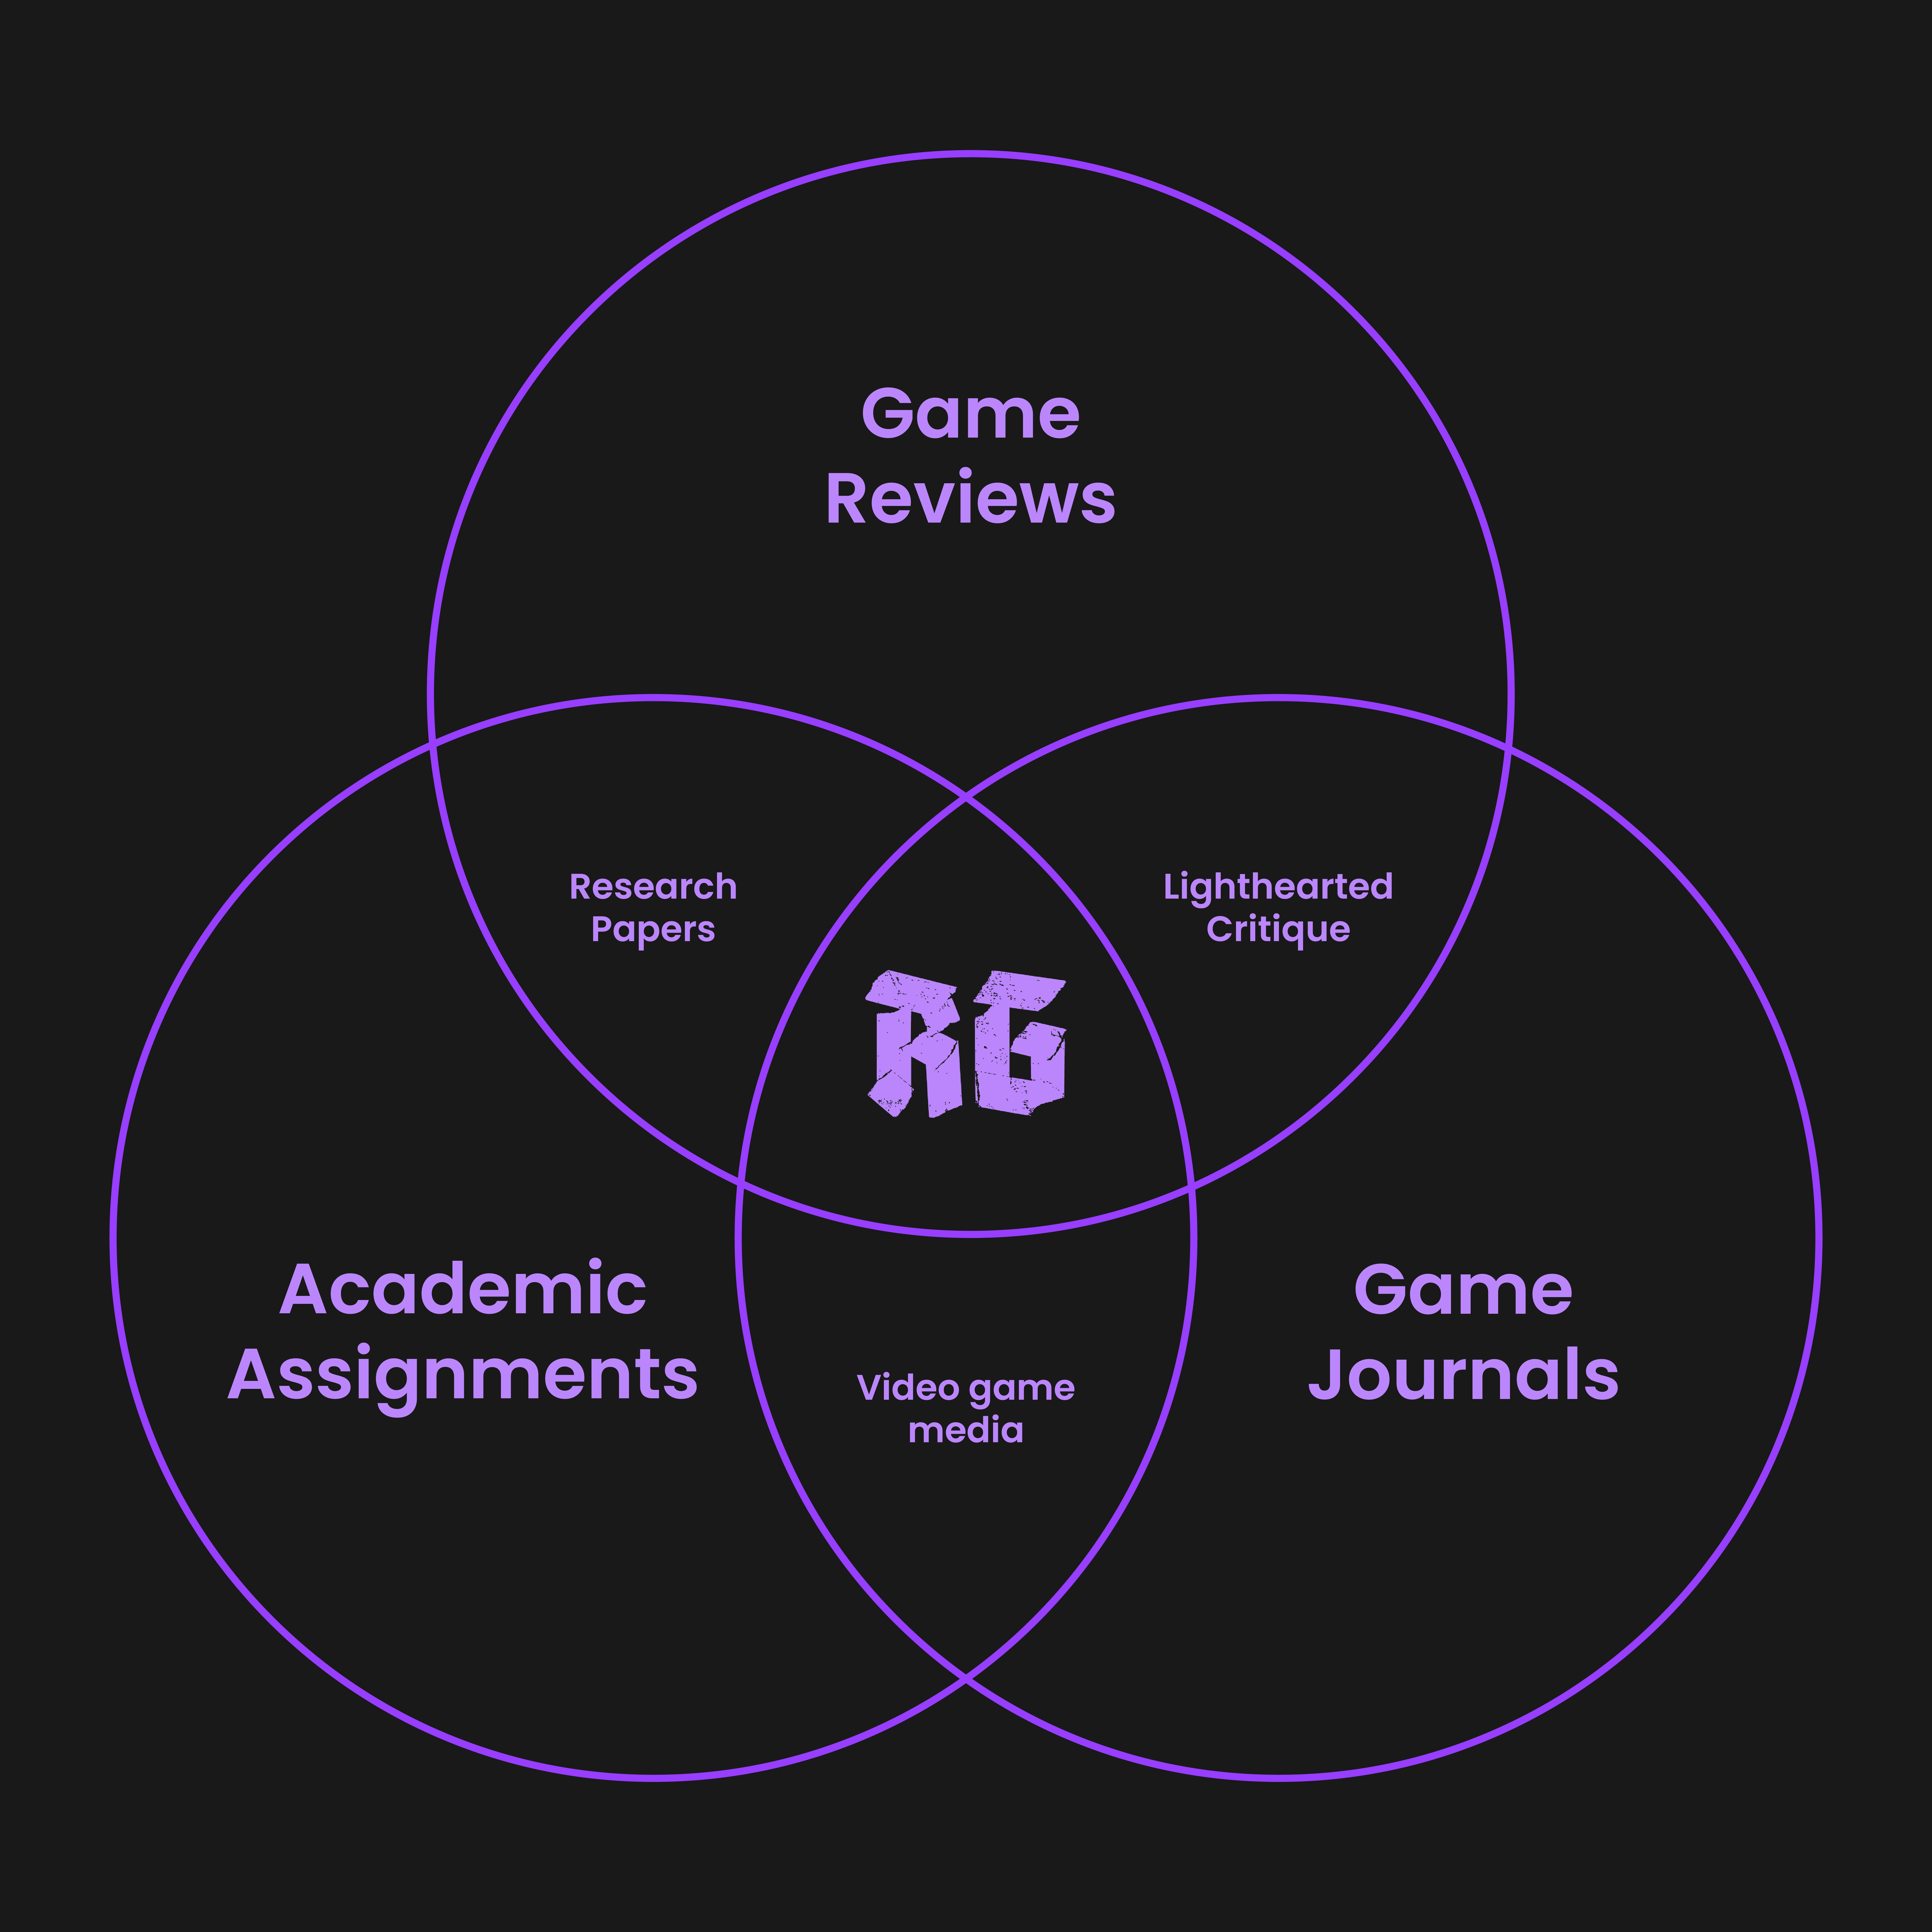 A 3-way venn diagram which summarizes my online self. In the center is the logo to RADDS GAMES. The three main outer sections are "Game Reviews", "Game Journals", and "Academic Assignments".